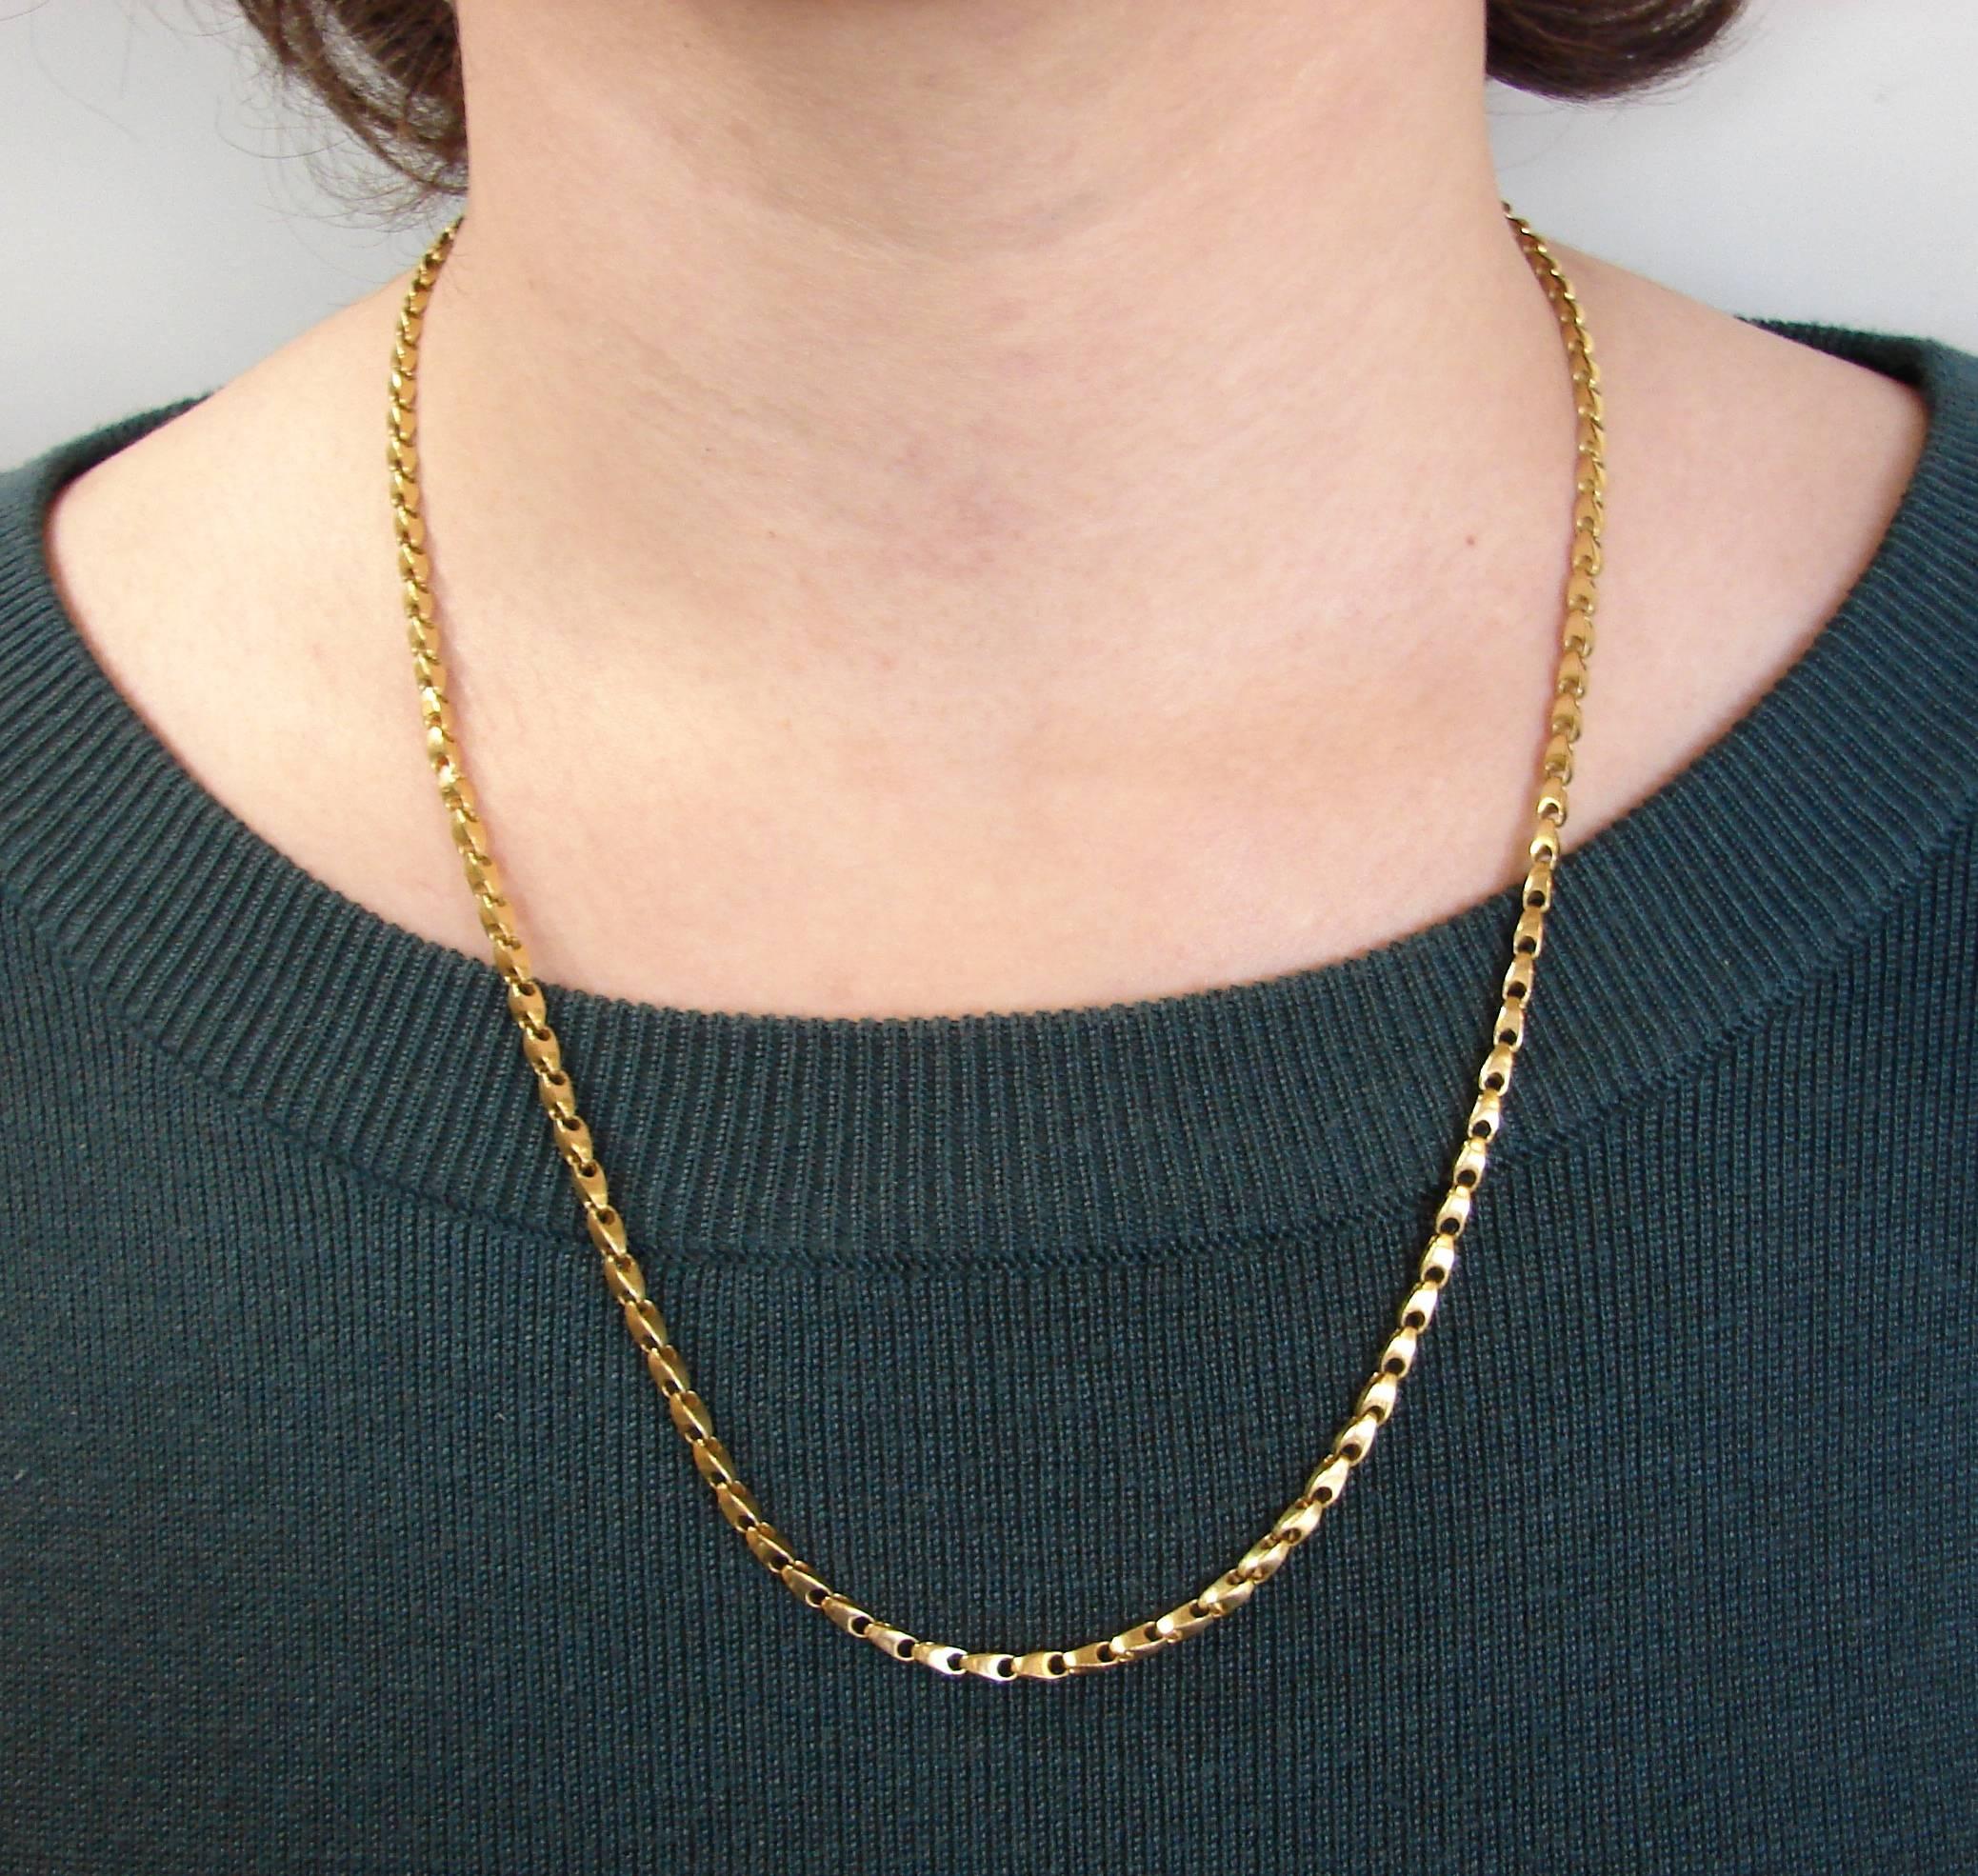 Elegant, smooth and wearable chain necklace that is a great addition to your jewelry collection. It was created by Cartier in the 1970s. 
The necklace is made of 18 karat yellow gold. 
It is 22-1/2 inches (57 cm) long and slightly under 1/8 of an